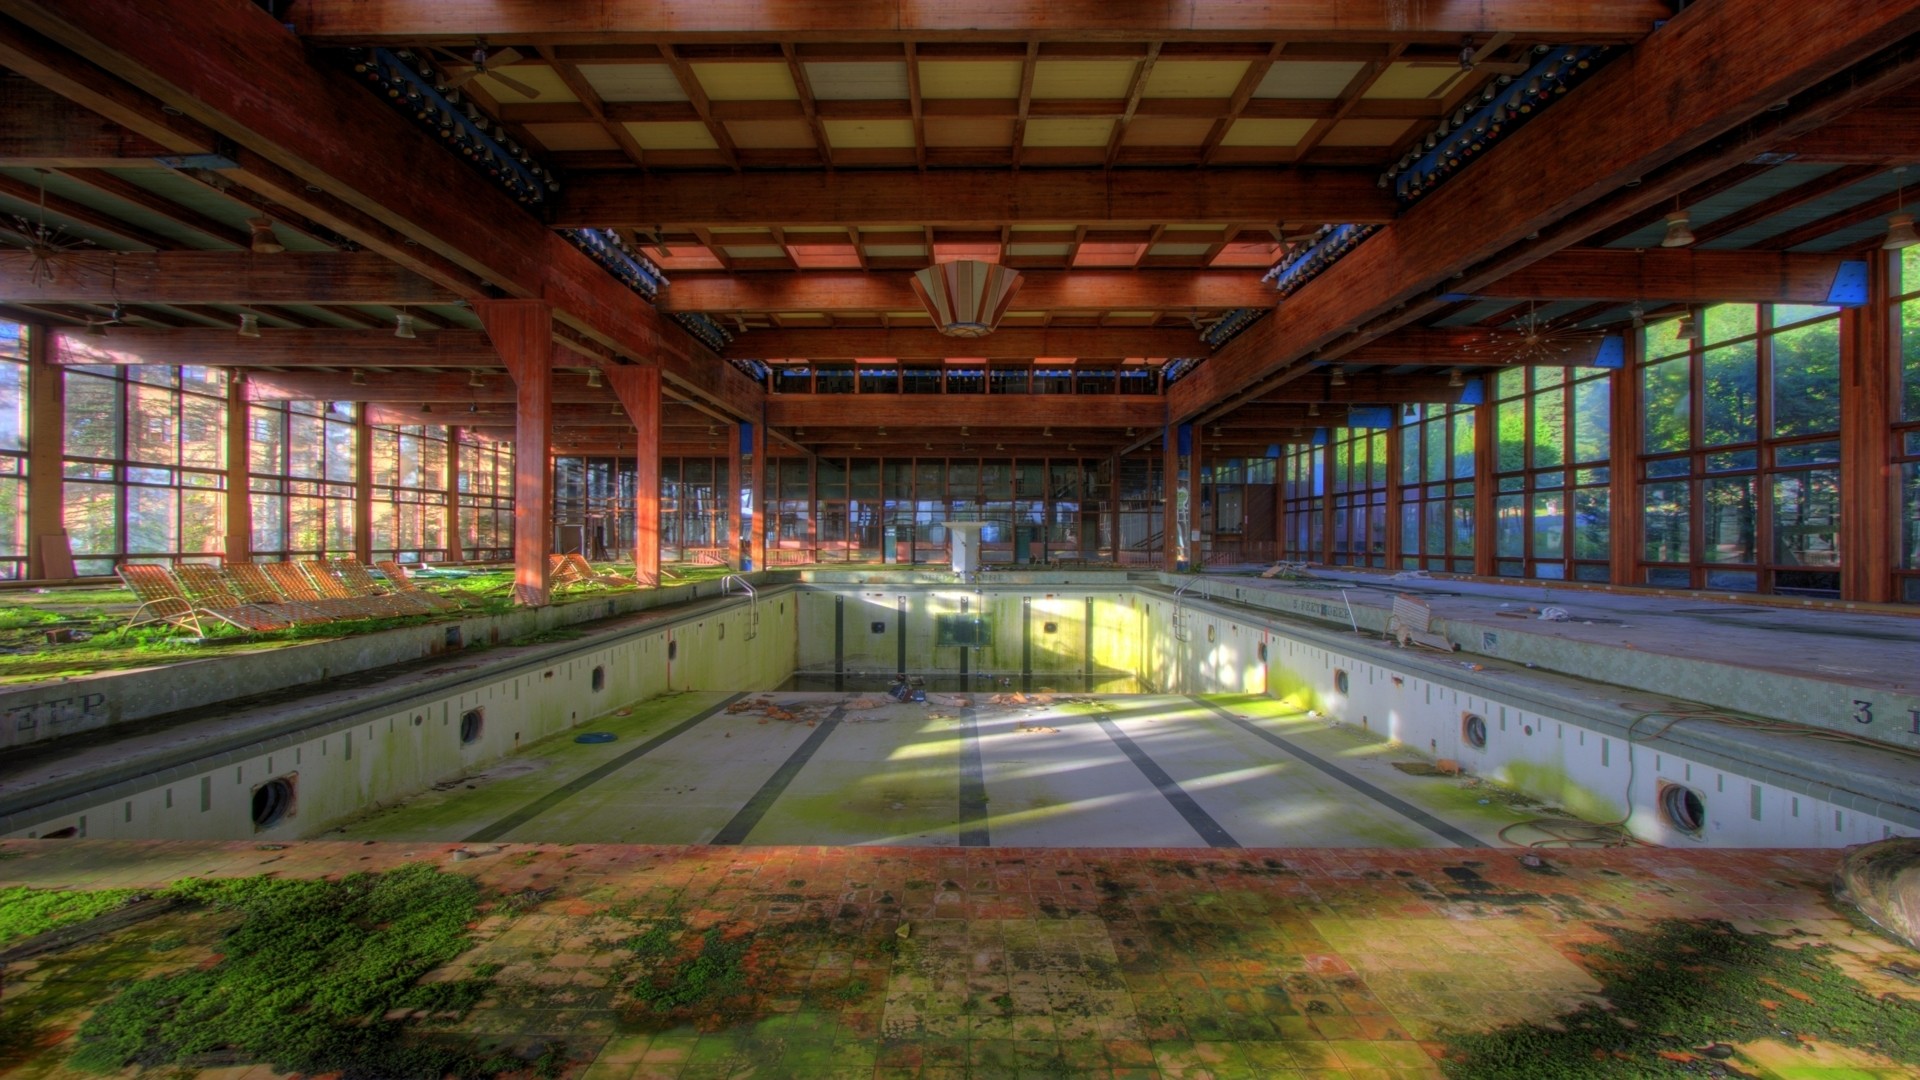 General 1920x1080 abandoned swimming pool indoors moss